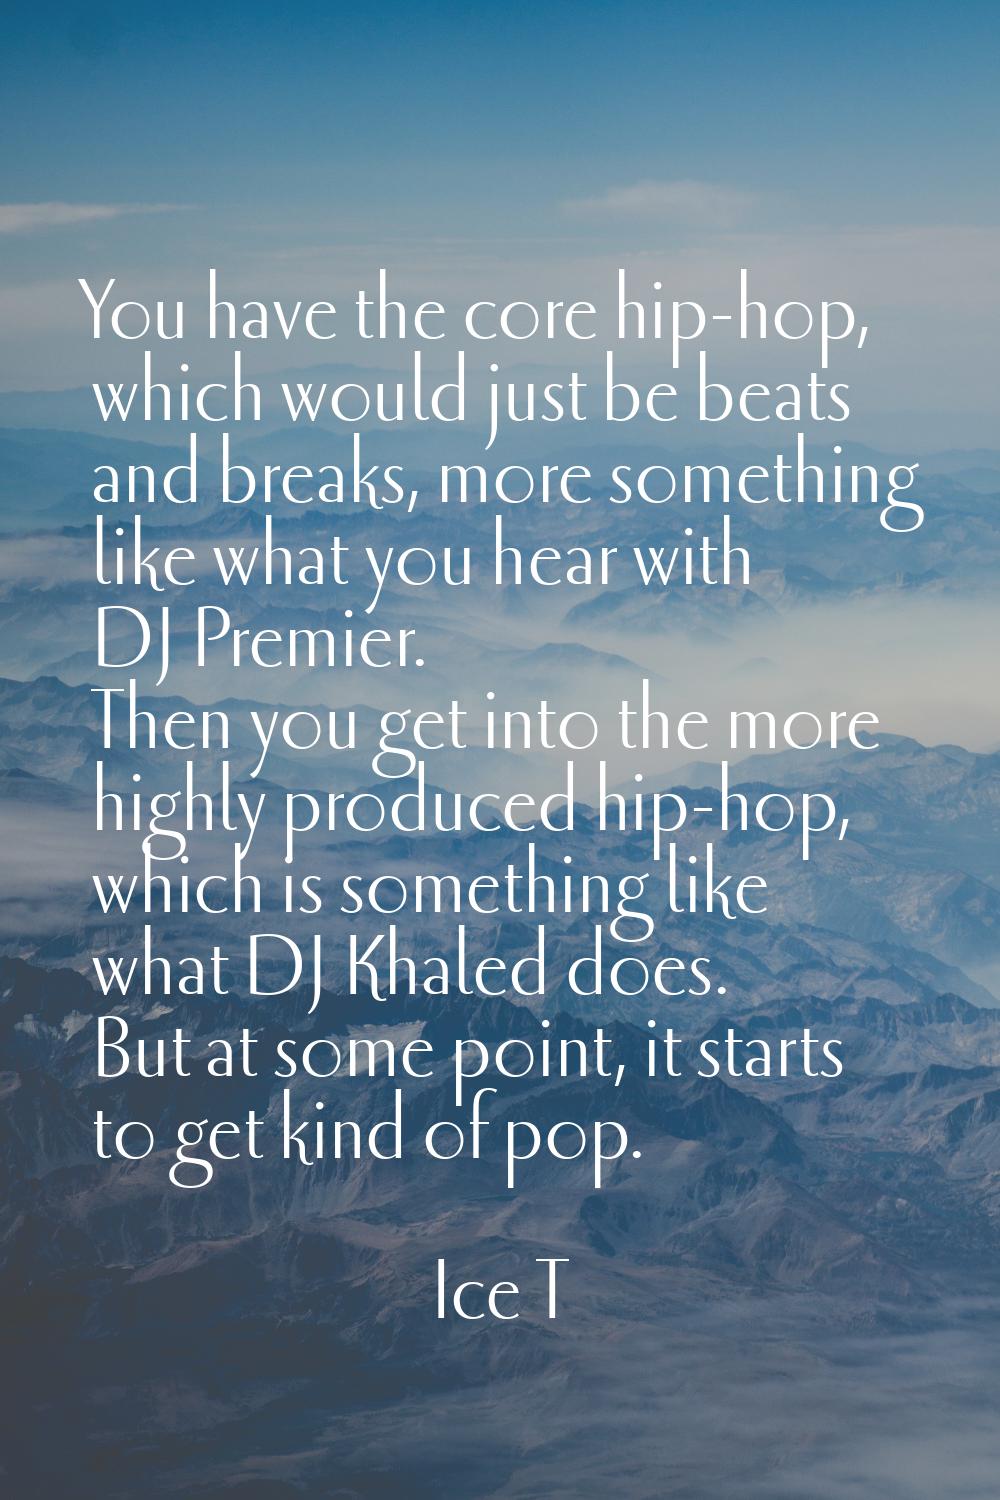 You have the core hip-hop, which would just be beats and breaks, more something like what you hear 